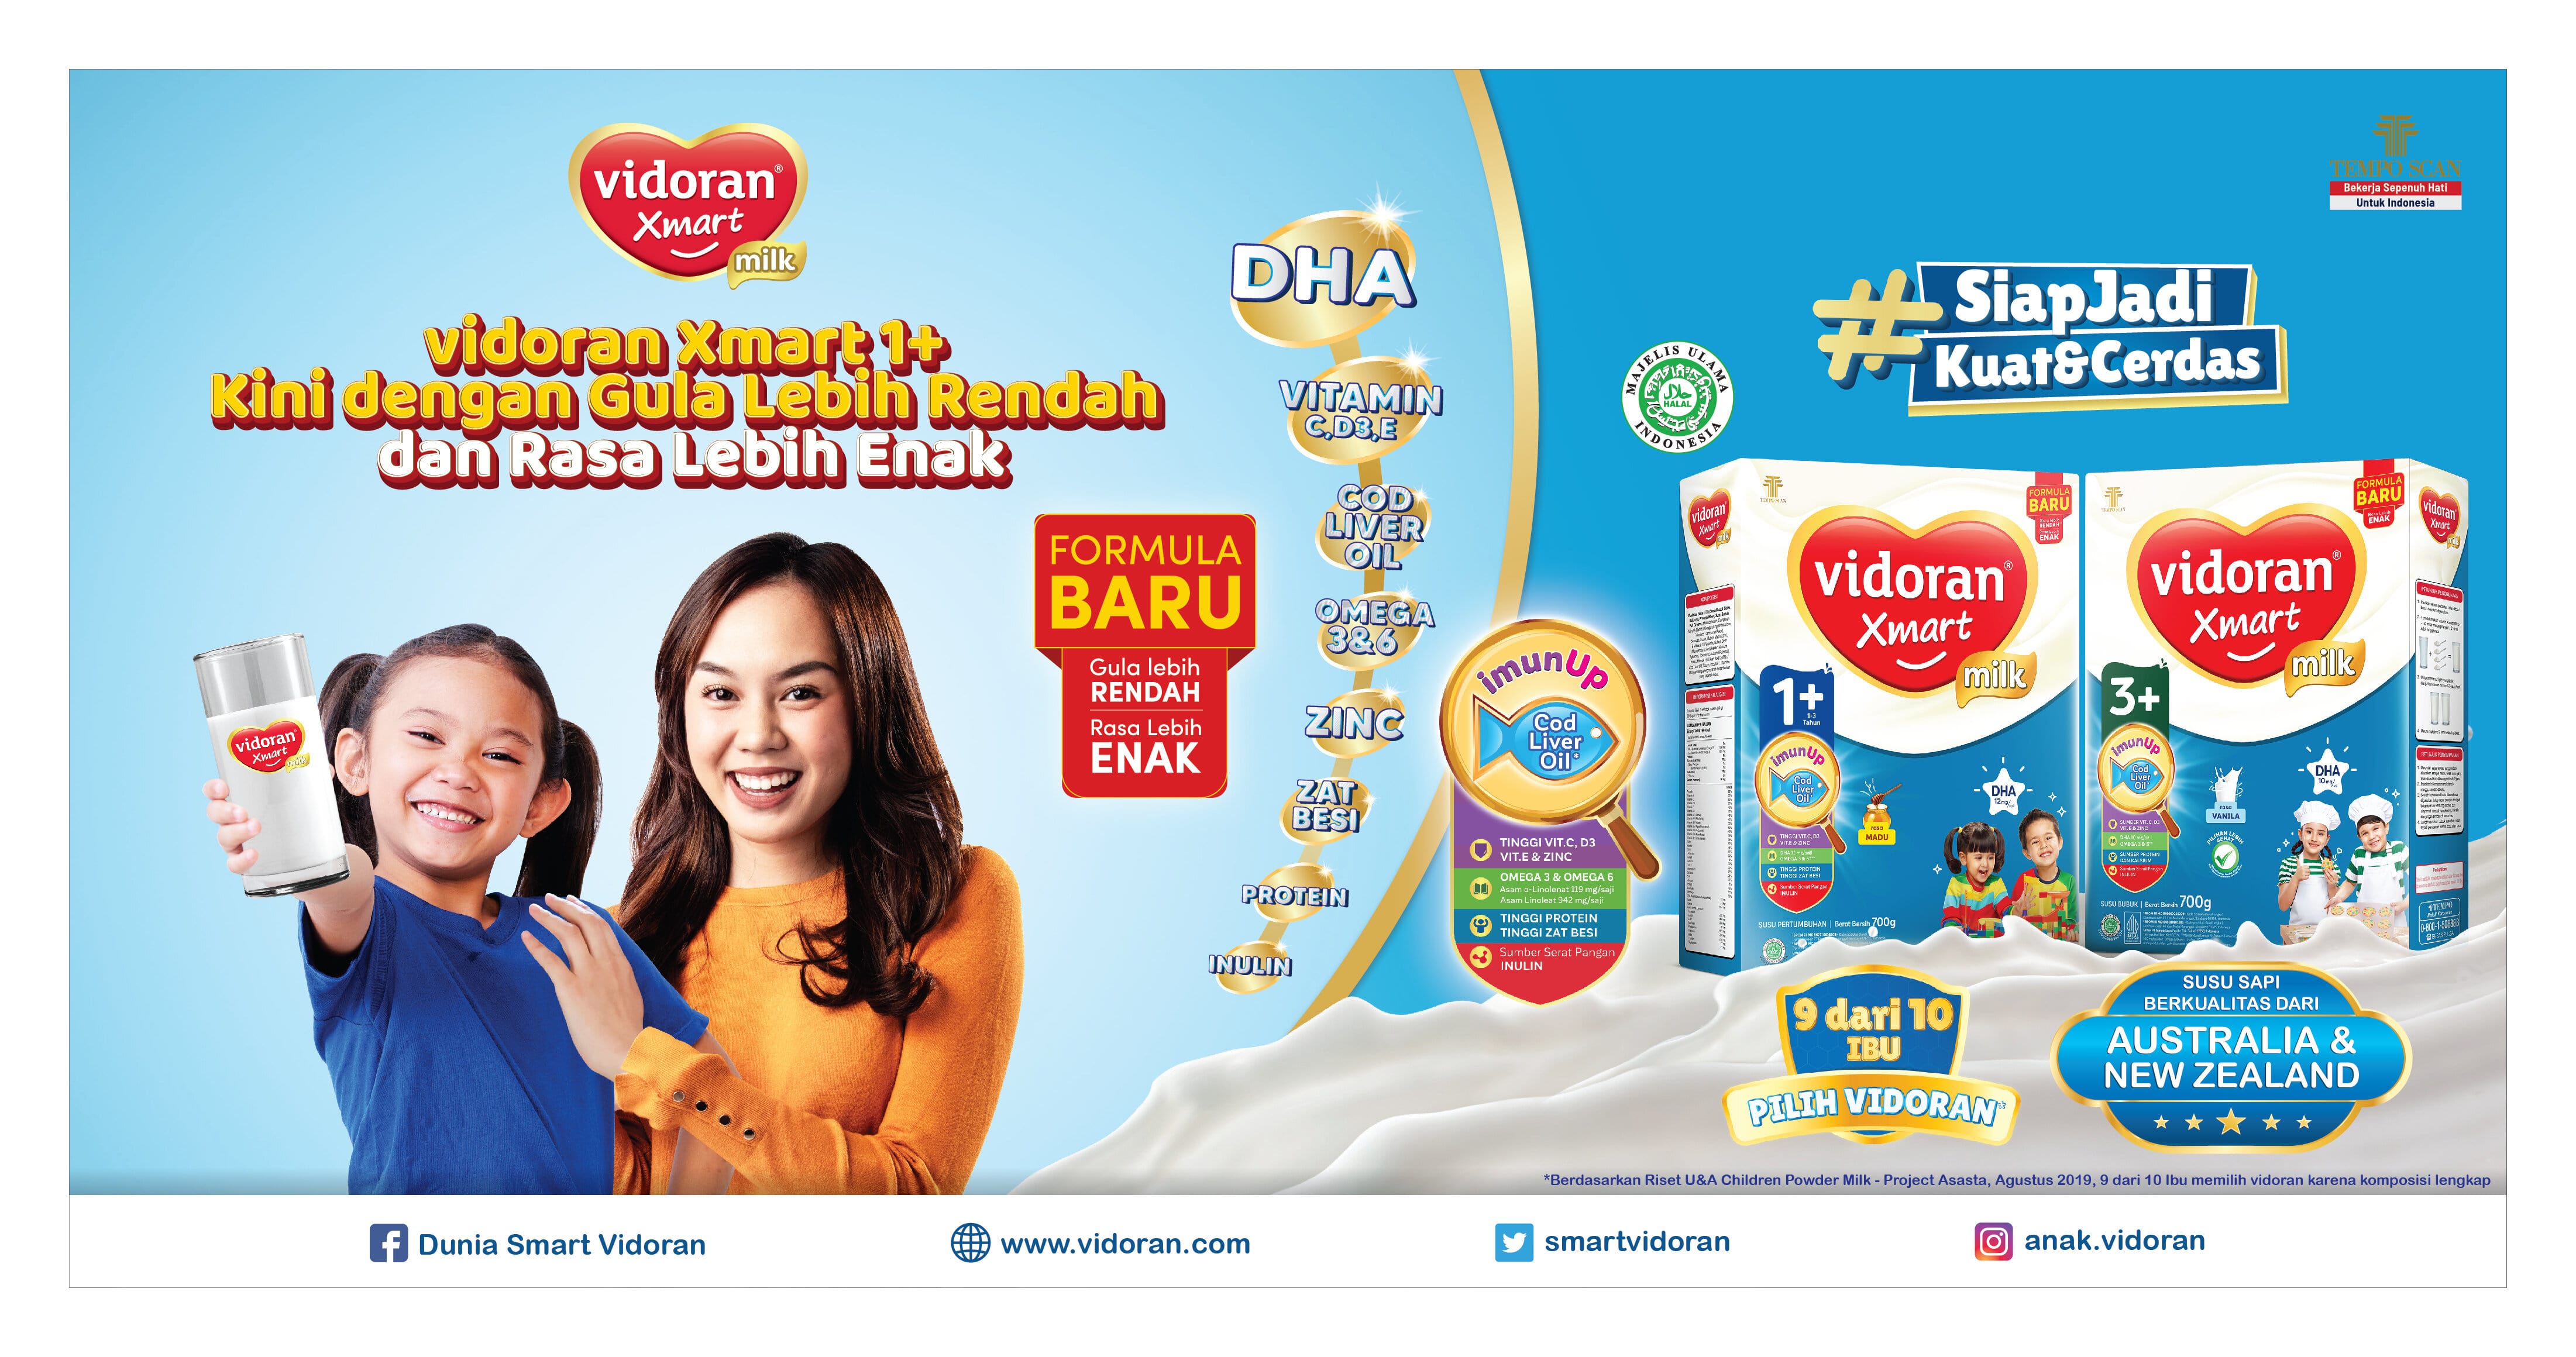 Fulfill Your Child's Nutrition with vidoran Xmart, Quality Milk with imunUp Formula